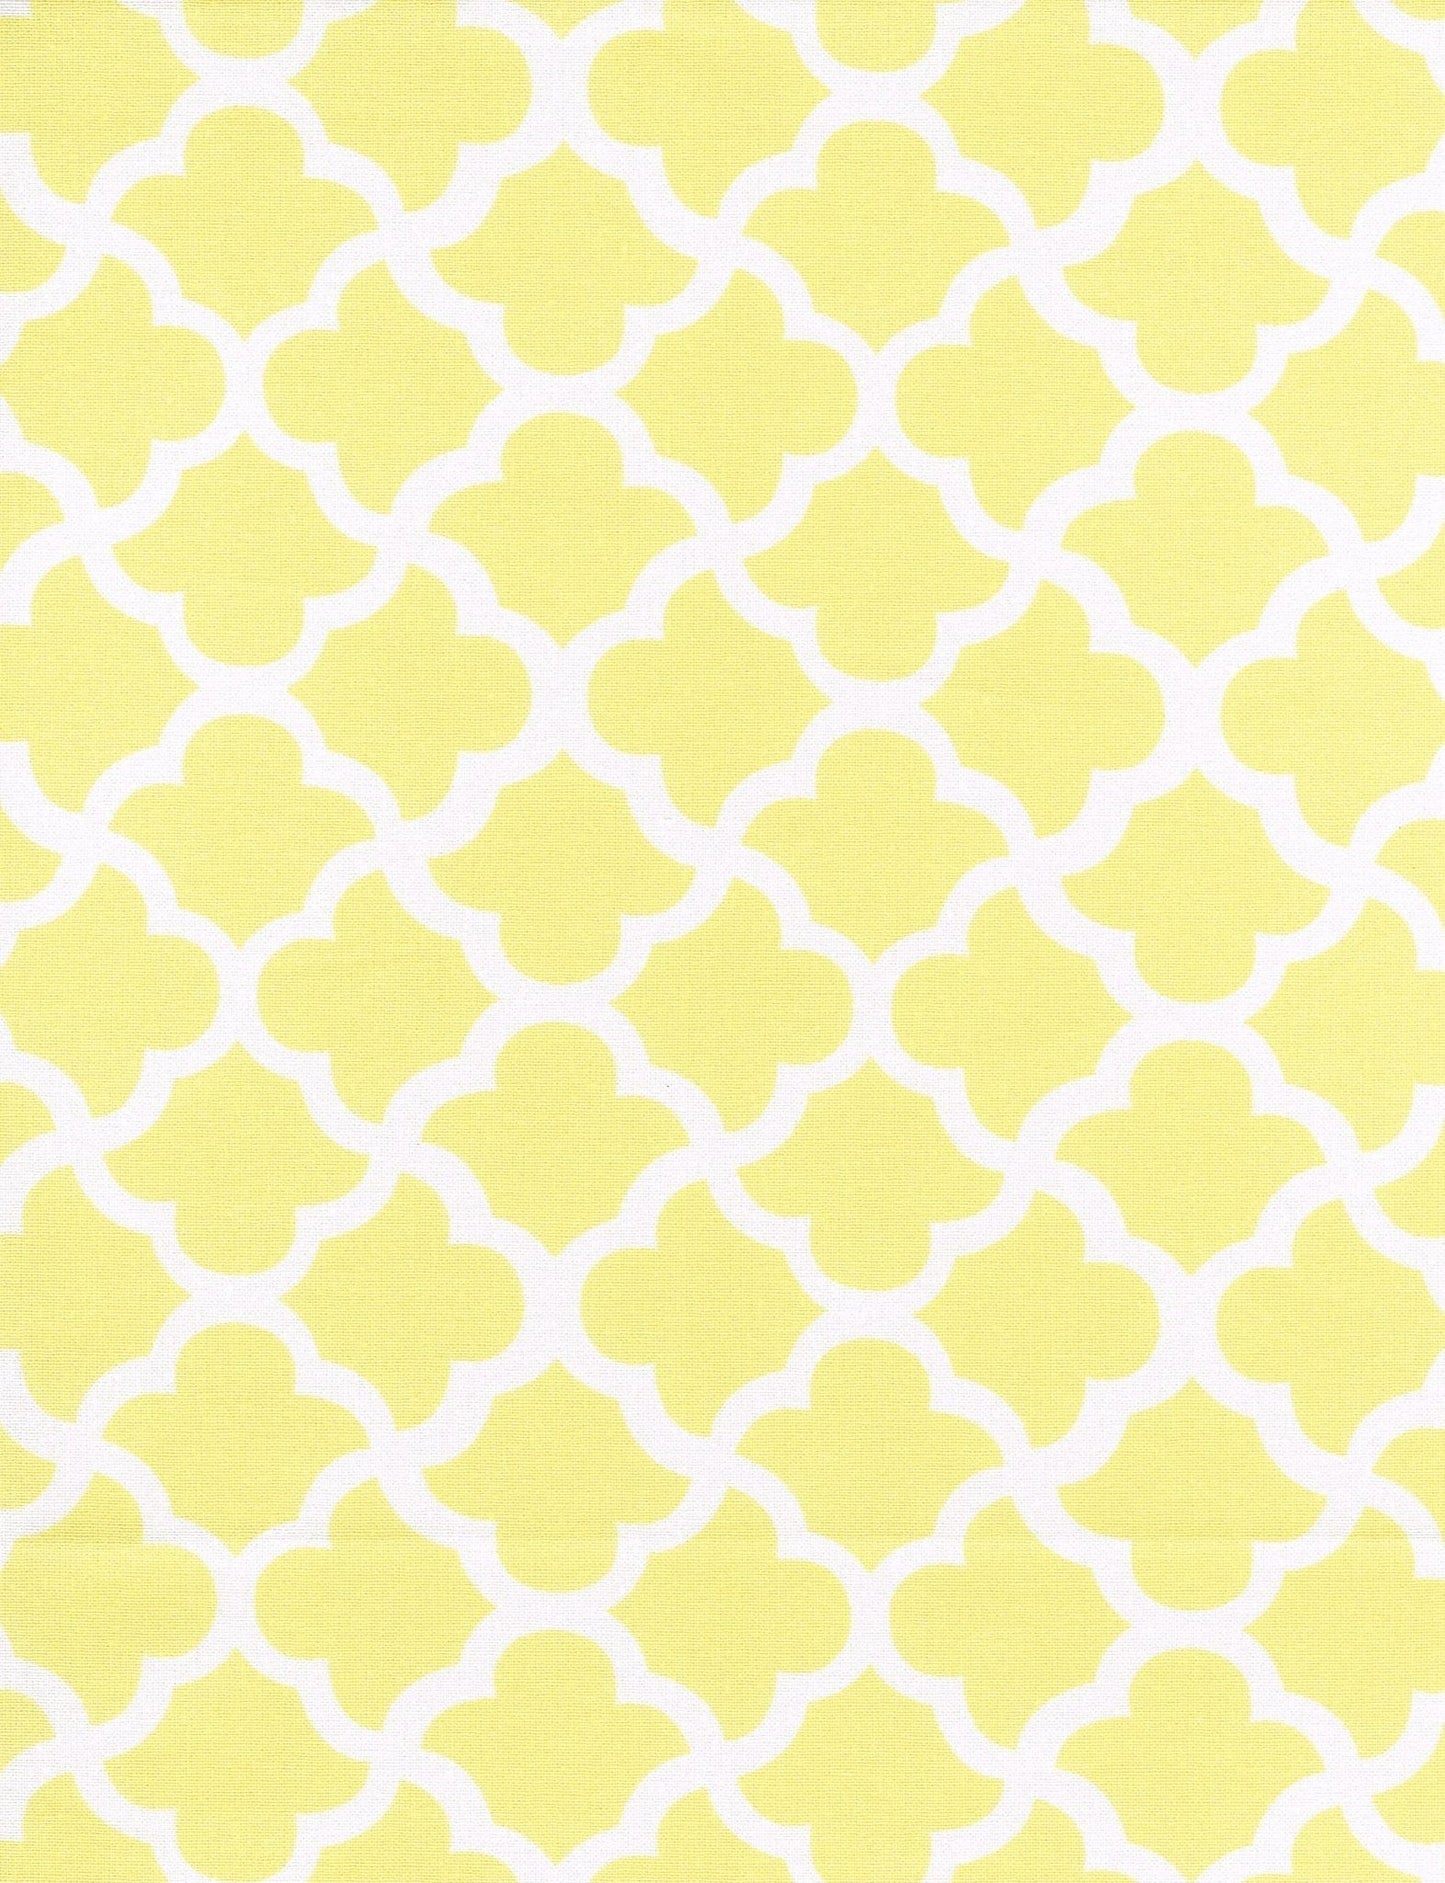 Hen House Linens latticework butter printed cloth cocktail aprons